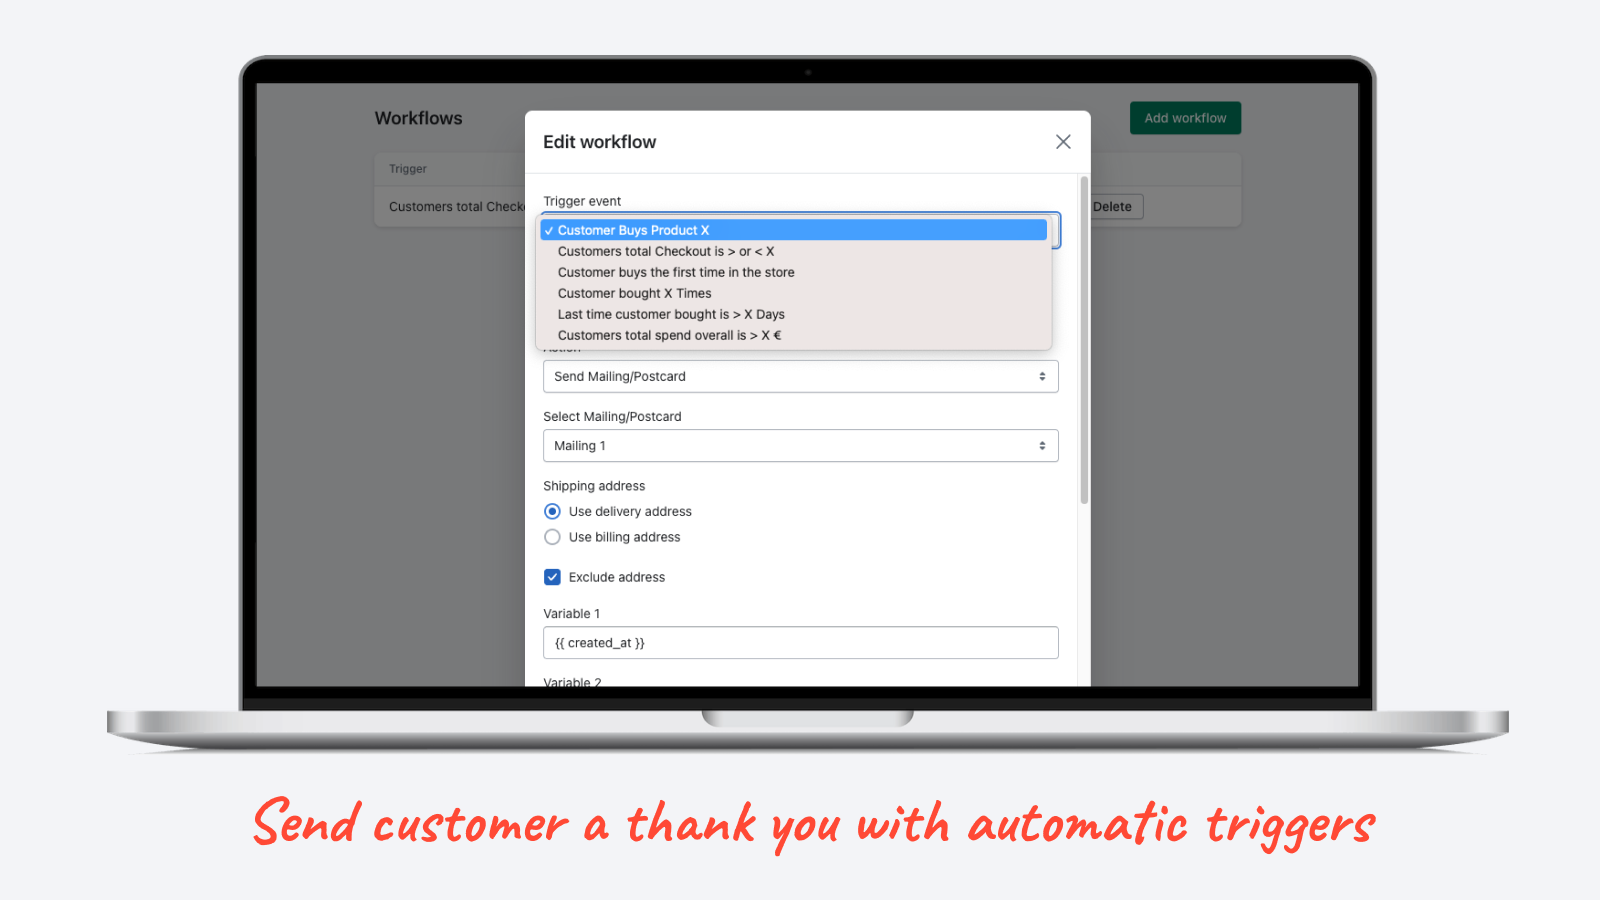 Send customer a thank you with automatic triggers